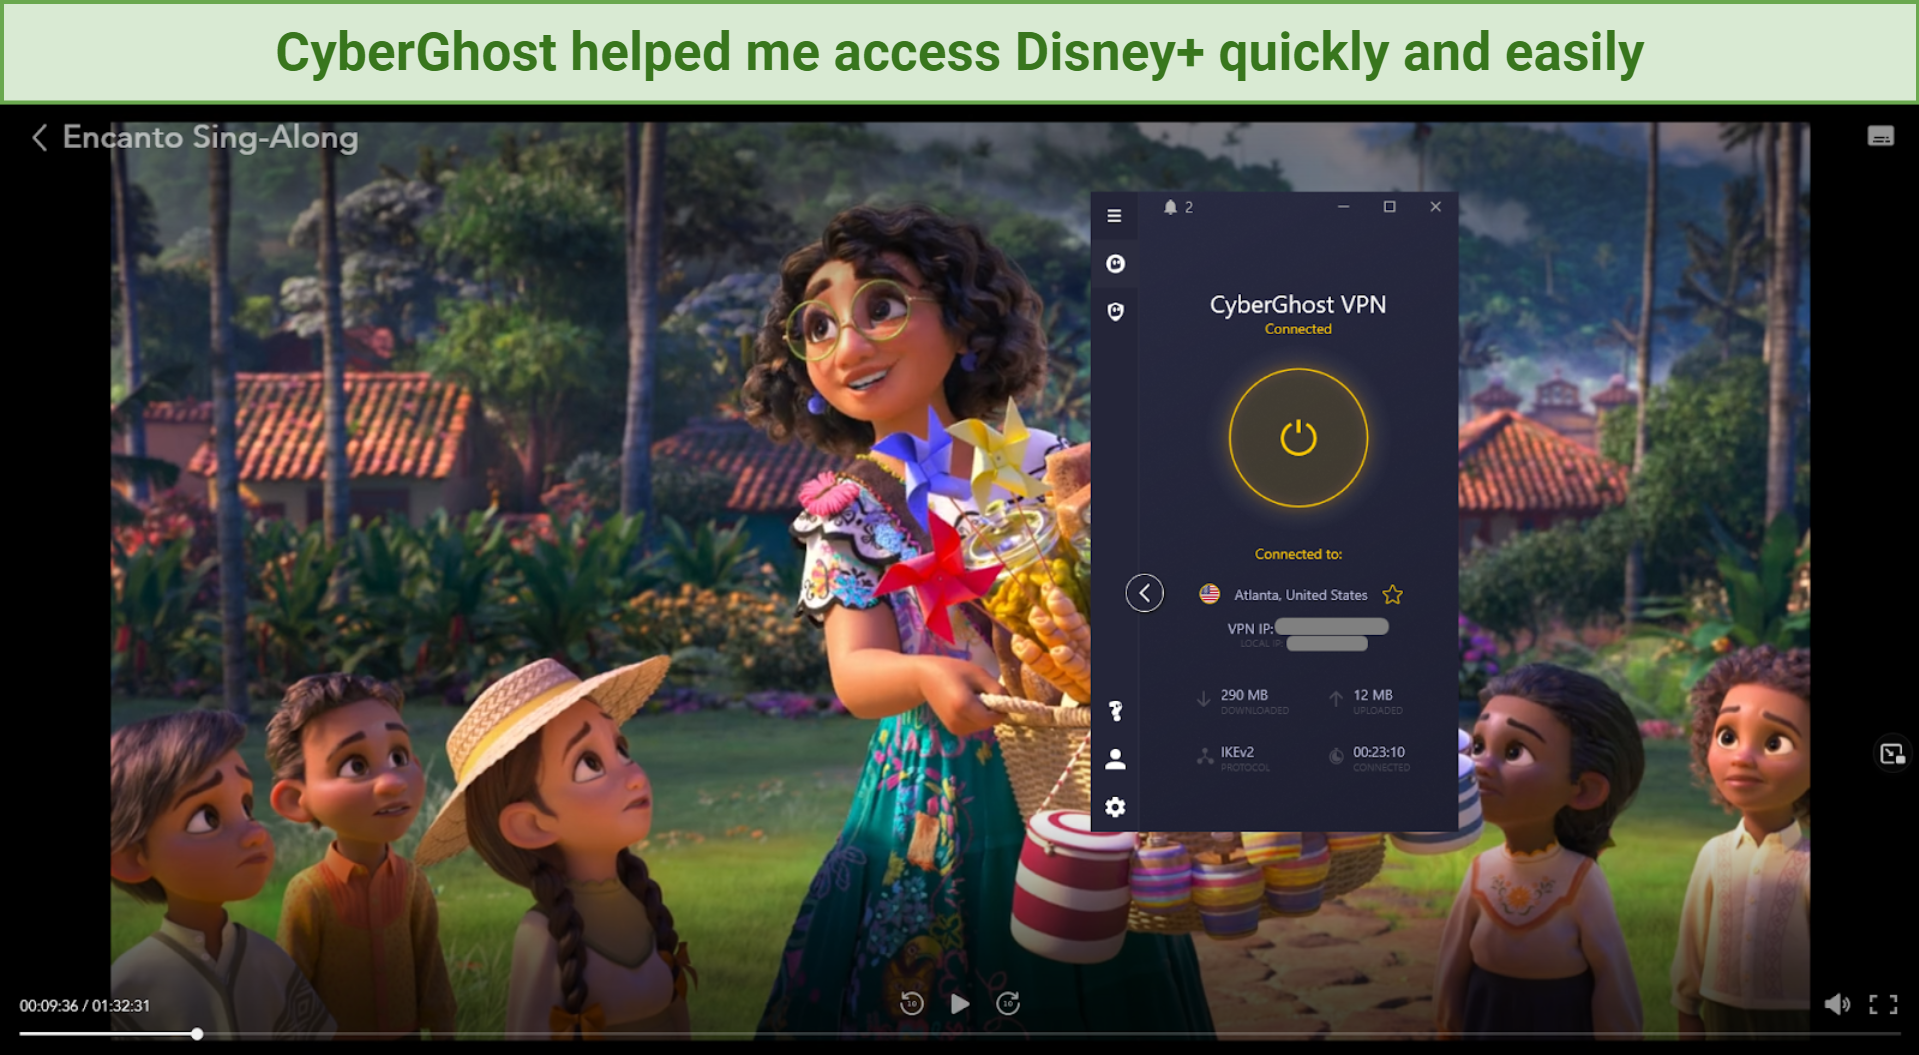 A screenshot of Disney+ being accessed by CyberGhost and playing the movie Encanto Sing-Along.